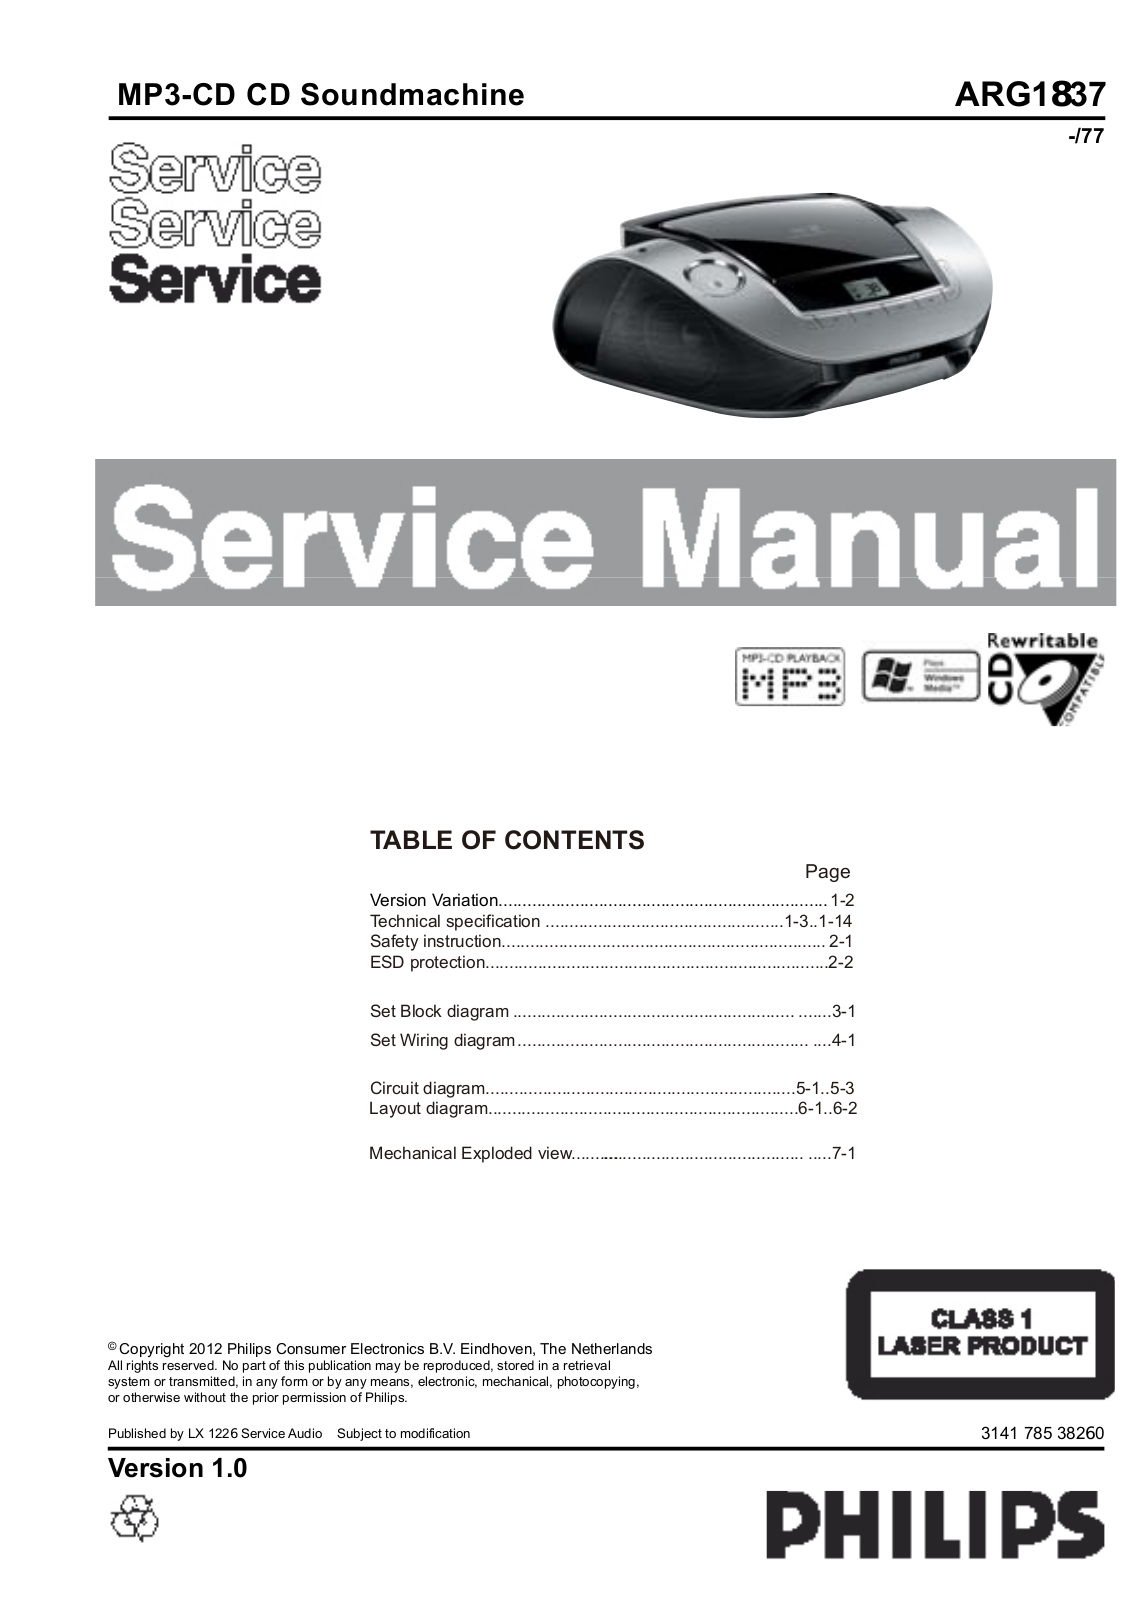 Philips ARG-1837 Service Manual